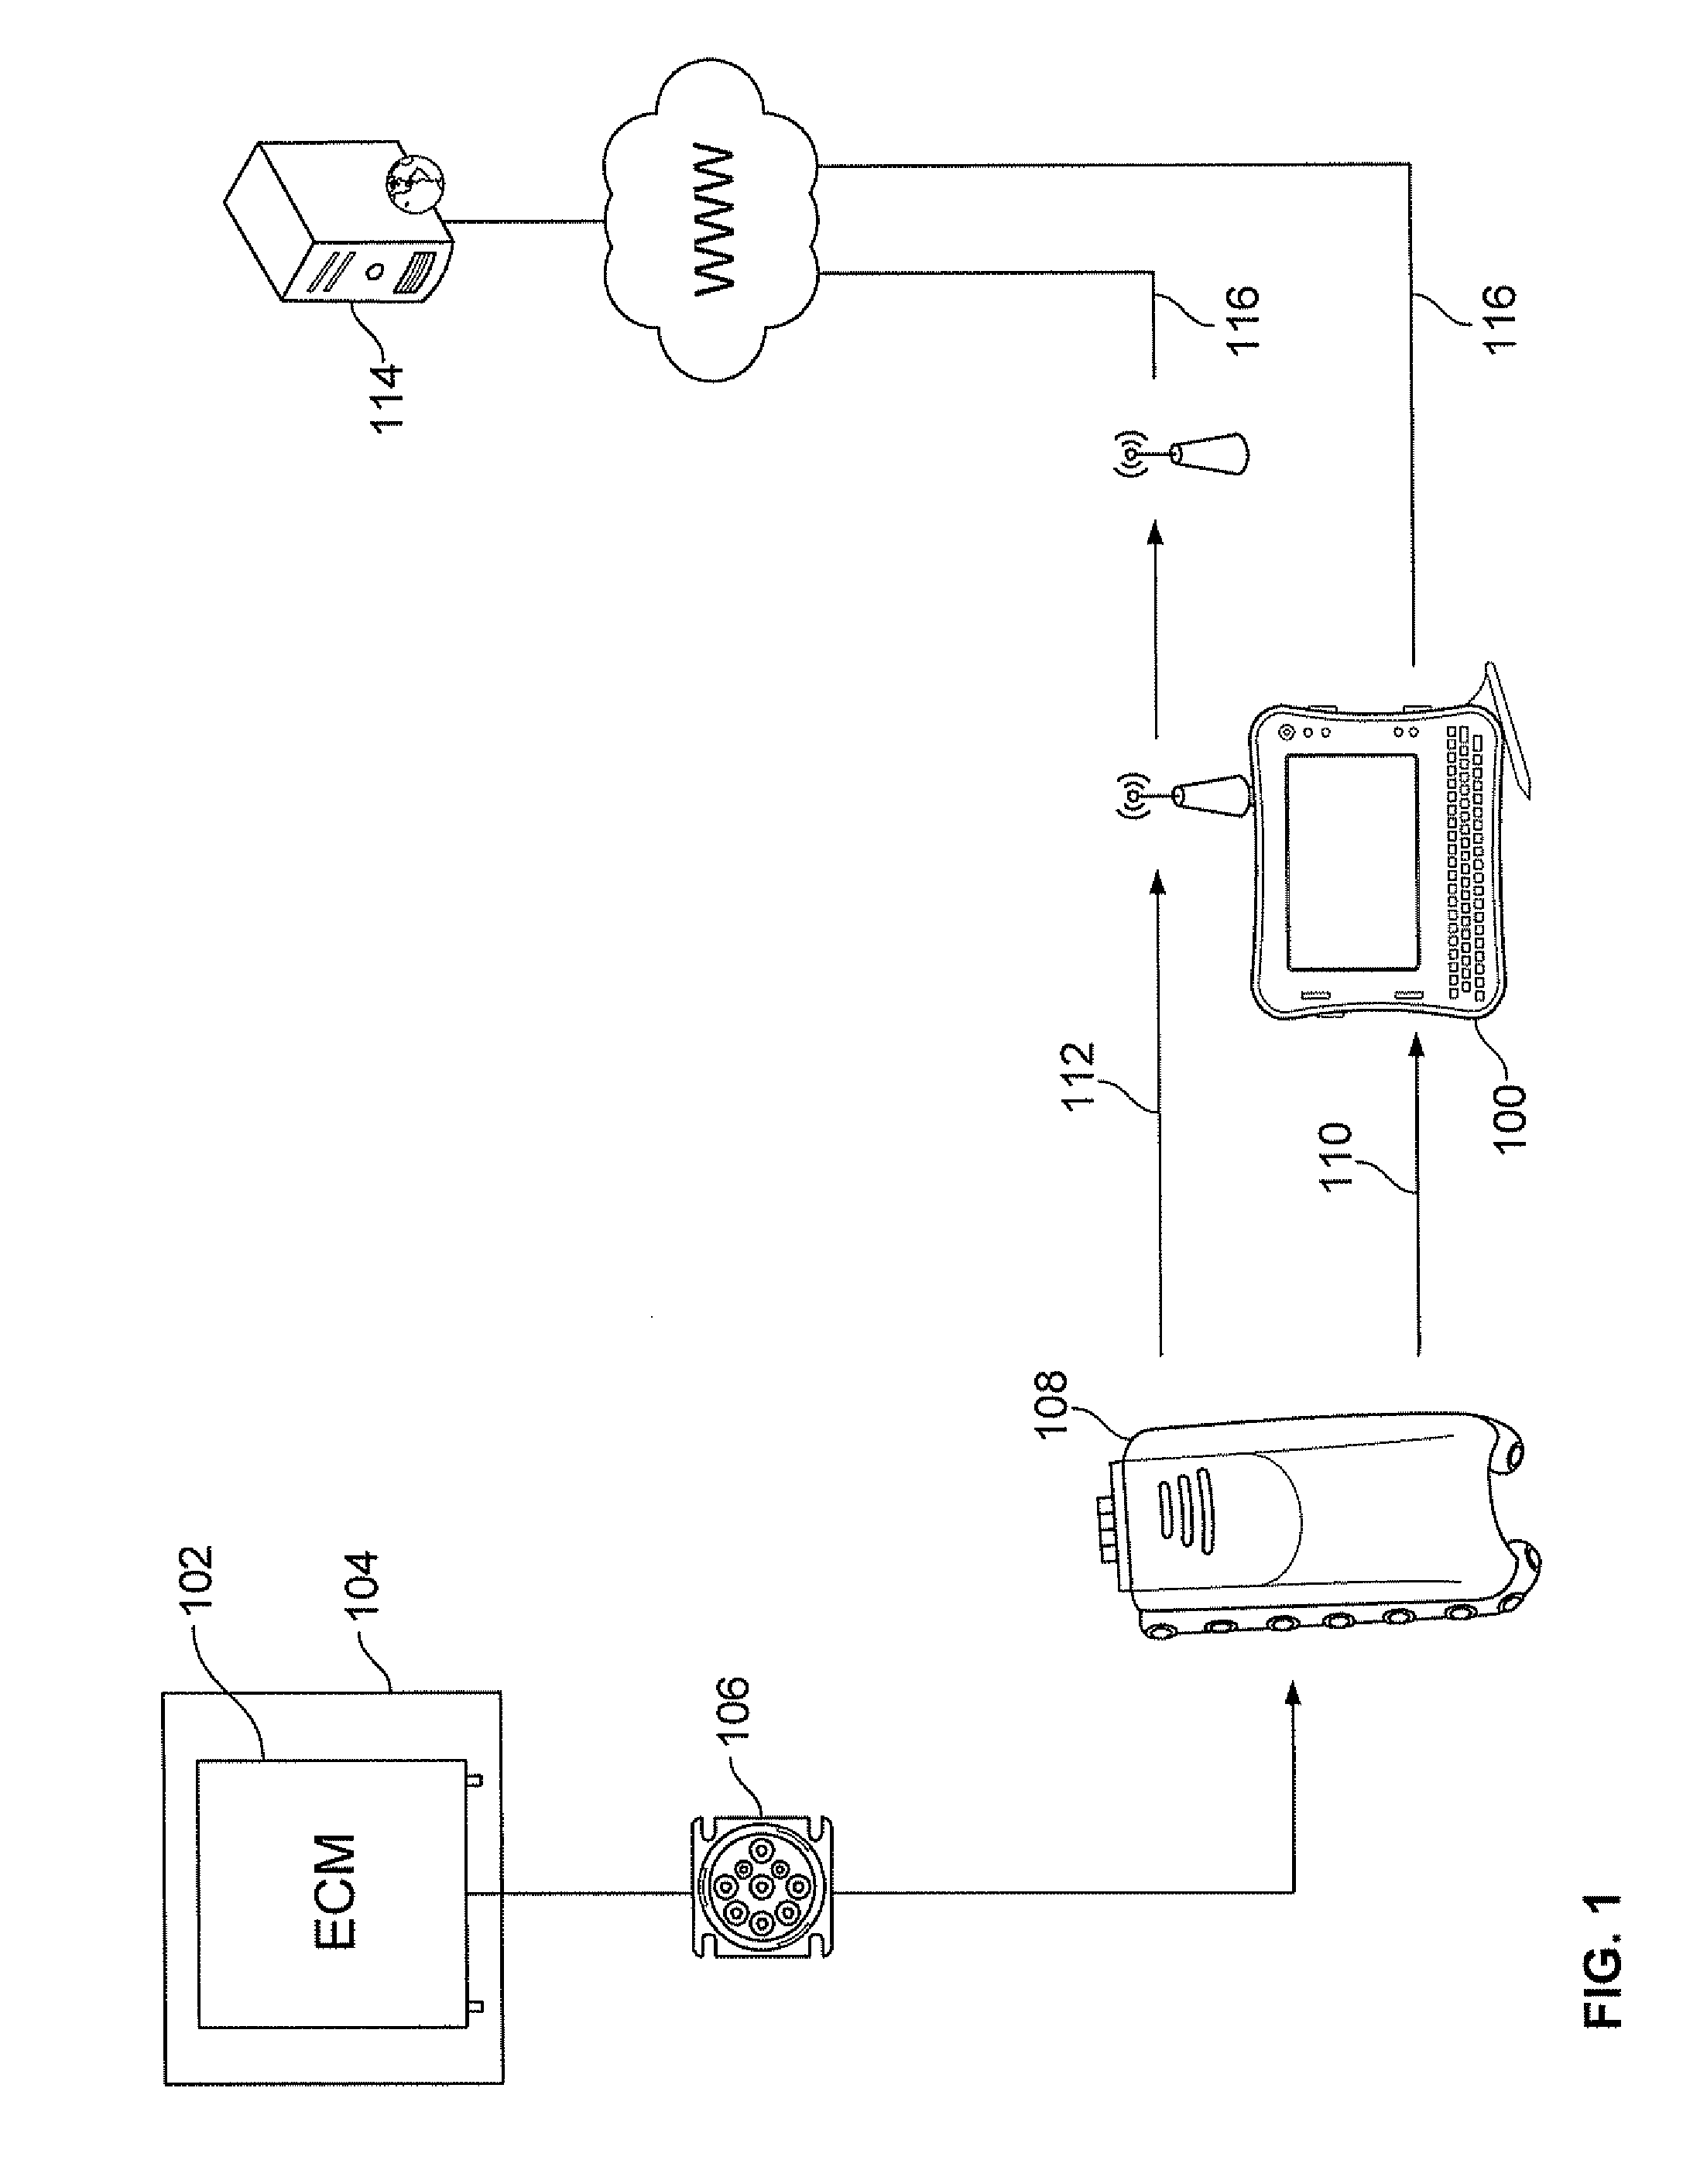 Method and system for retrieving diagnostic information